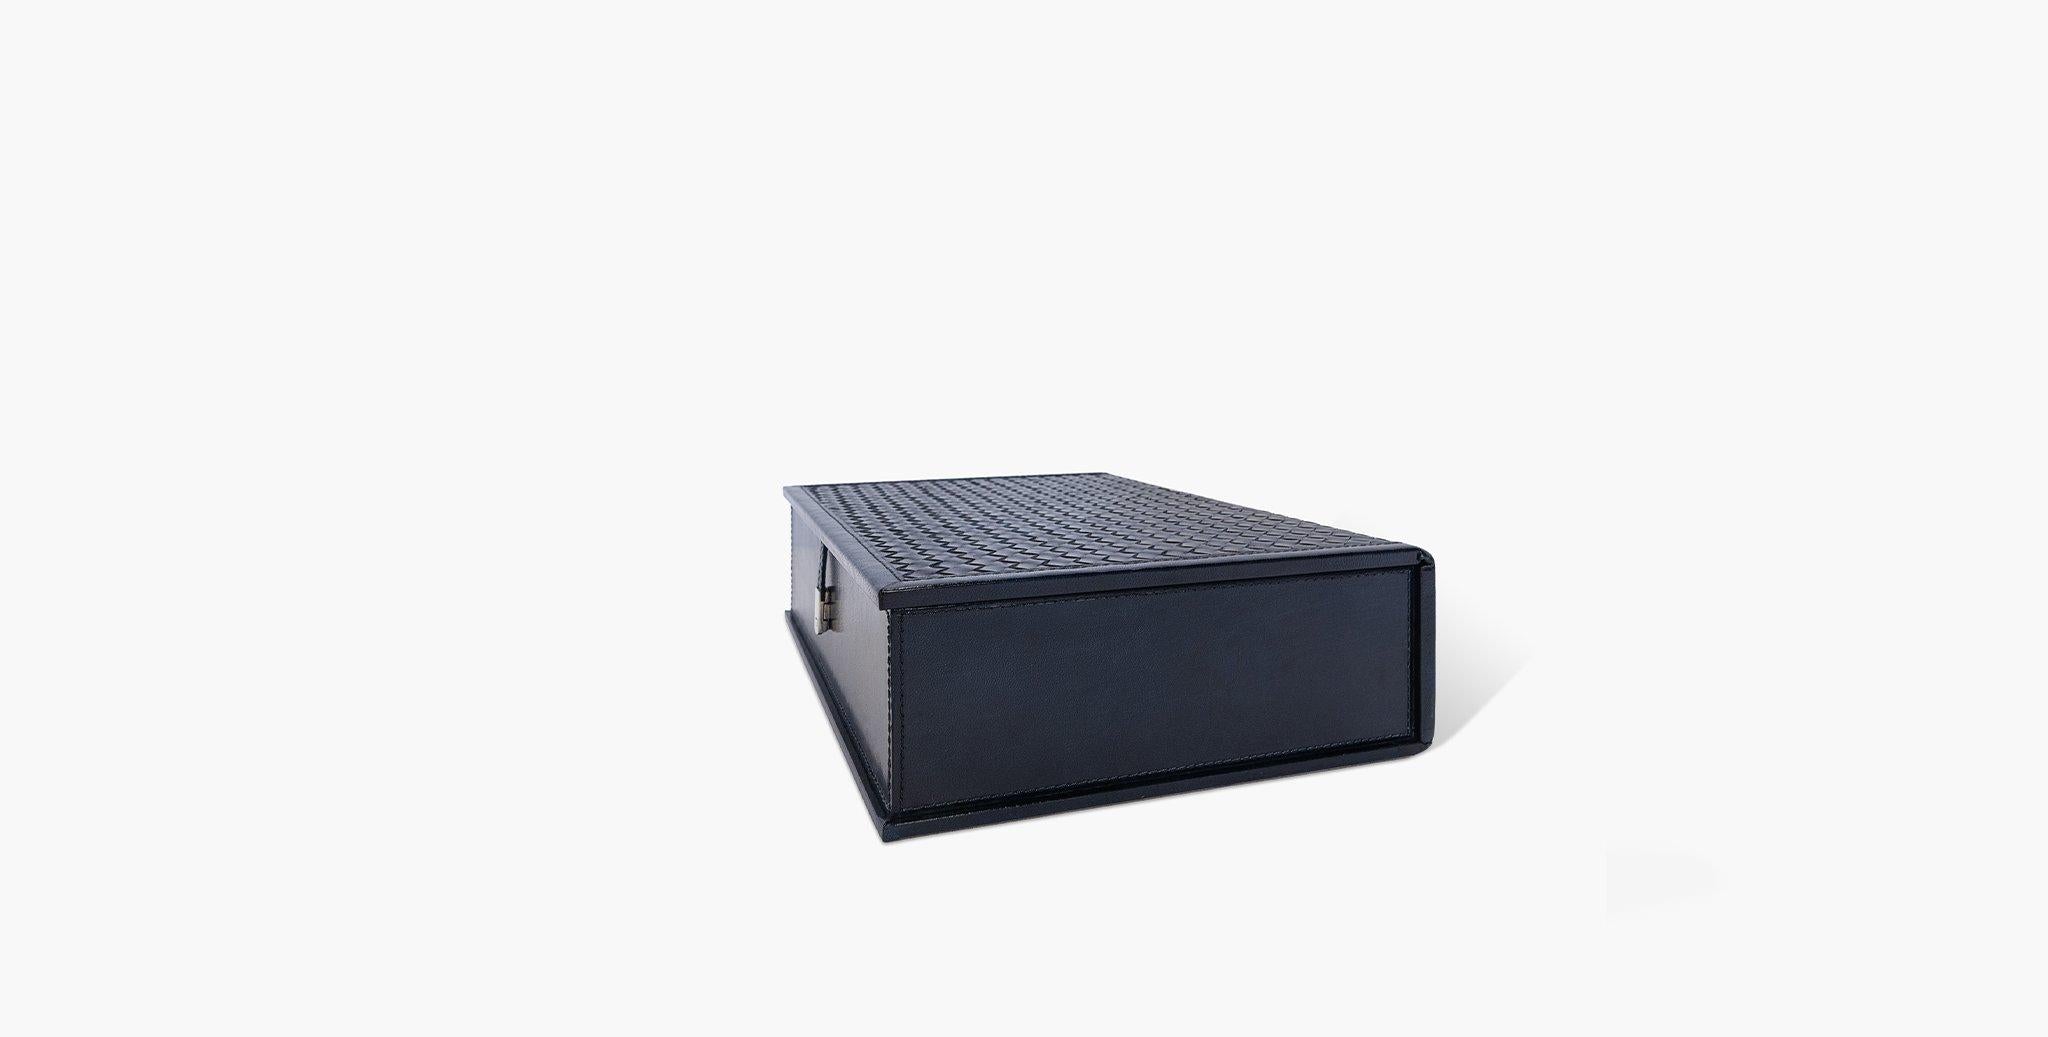 The Clarion Document Box features a sleek profile and textured leather exterior to store your loose documents. 

Basketweave leather design
Suede interior 
Polished magnetic metal lock closure
Imported